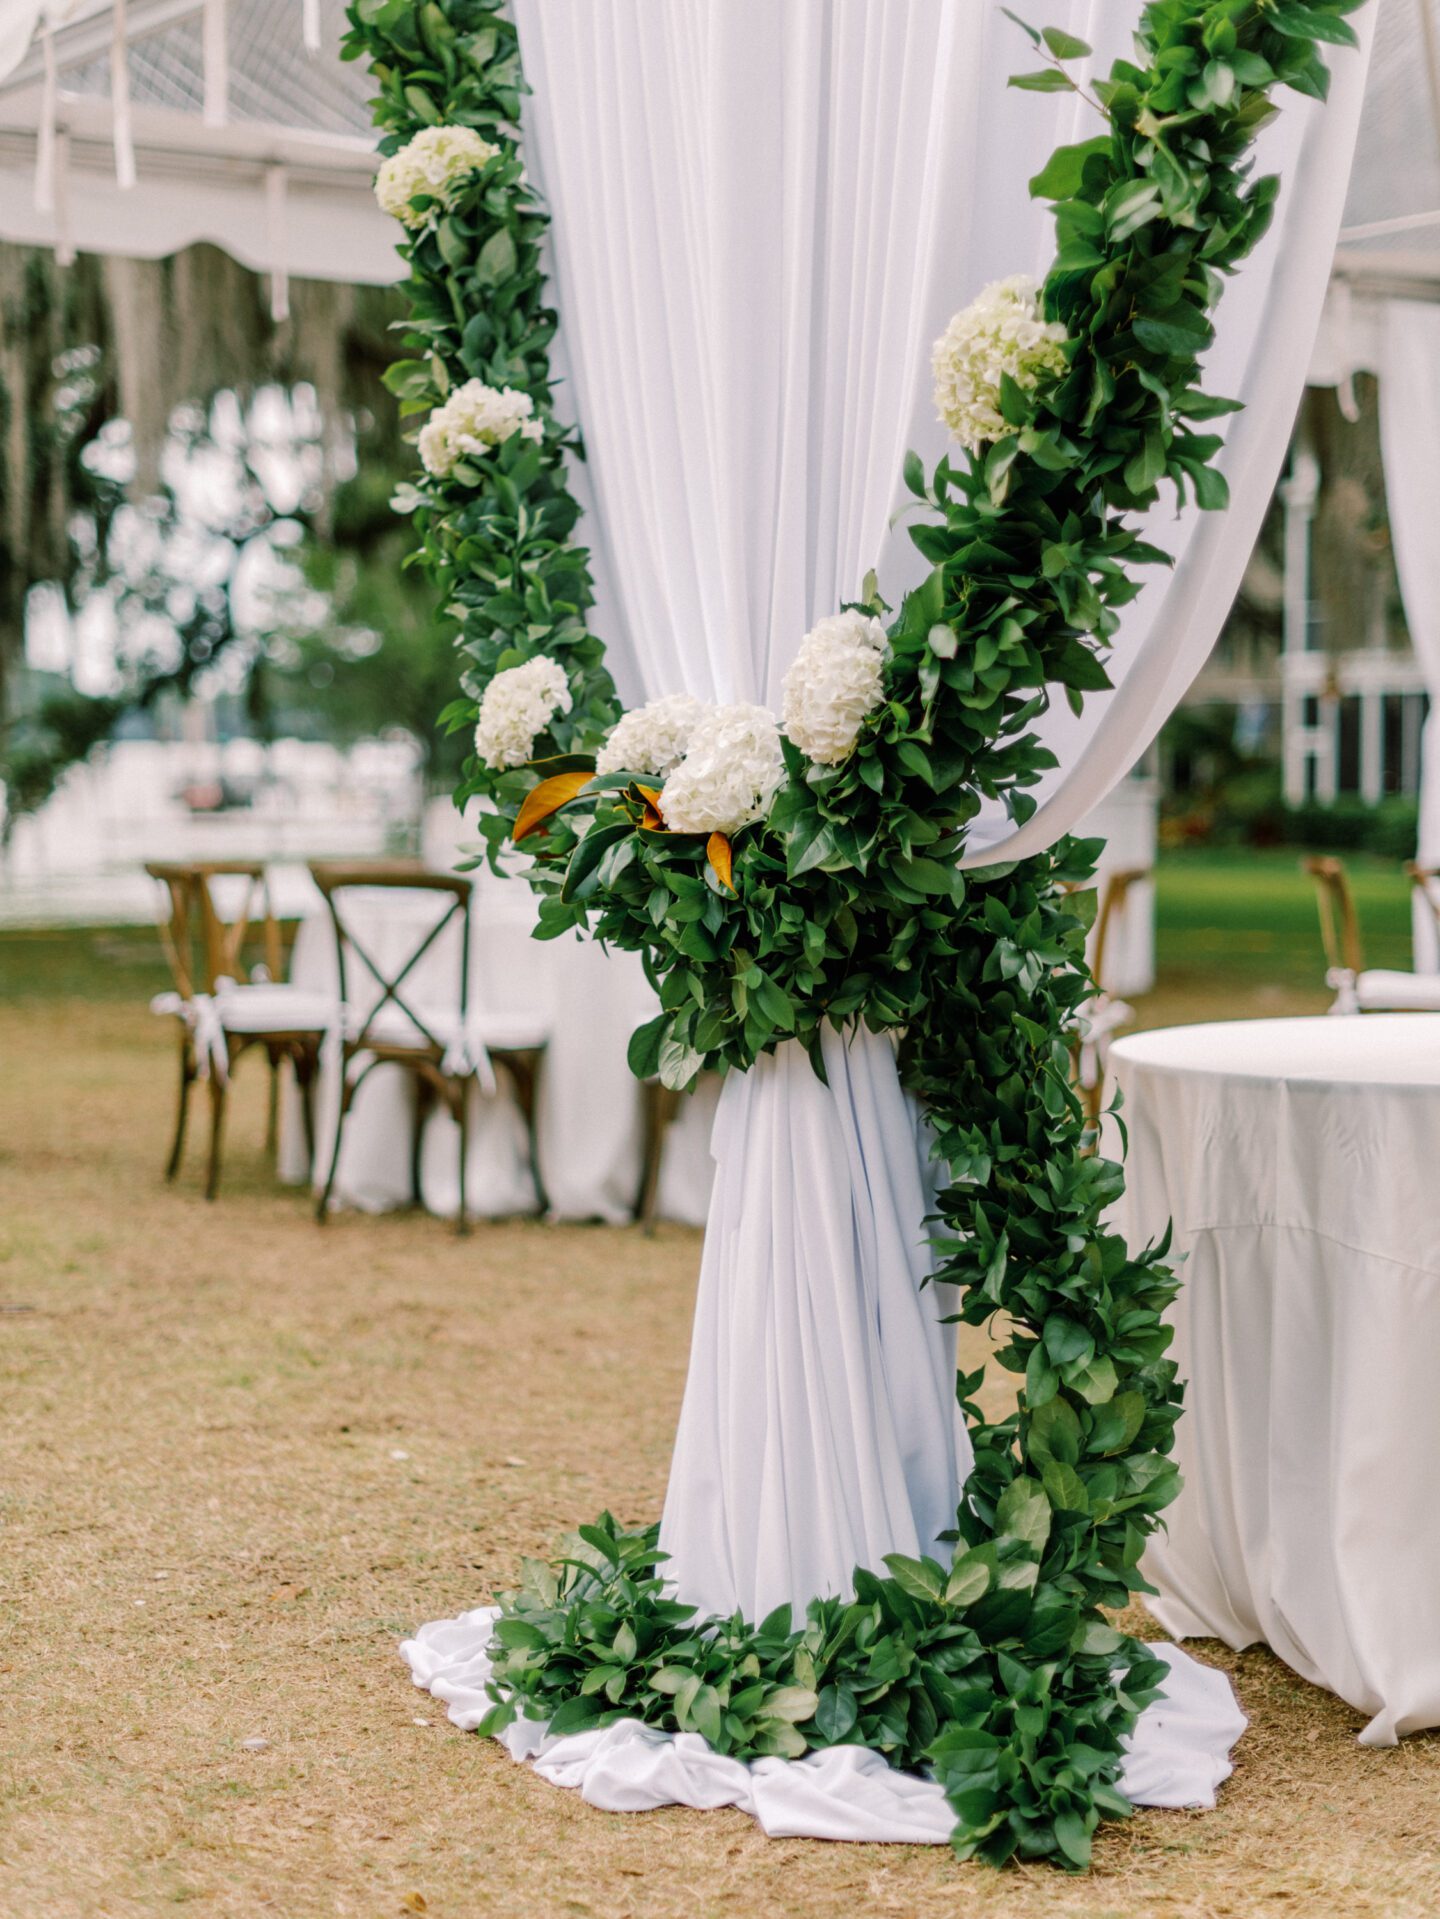 An outdoor wedding with greenery and flowers.